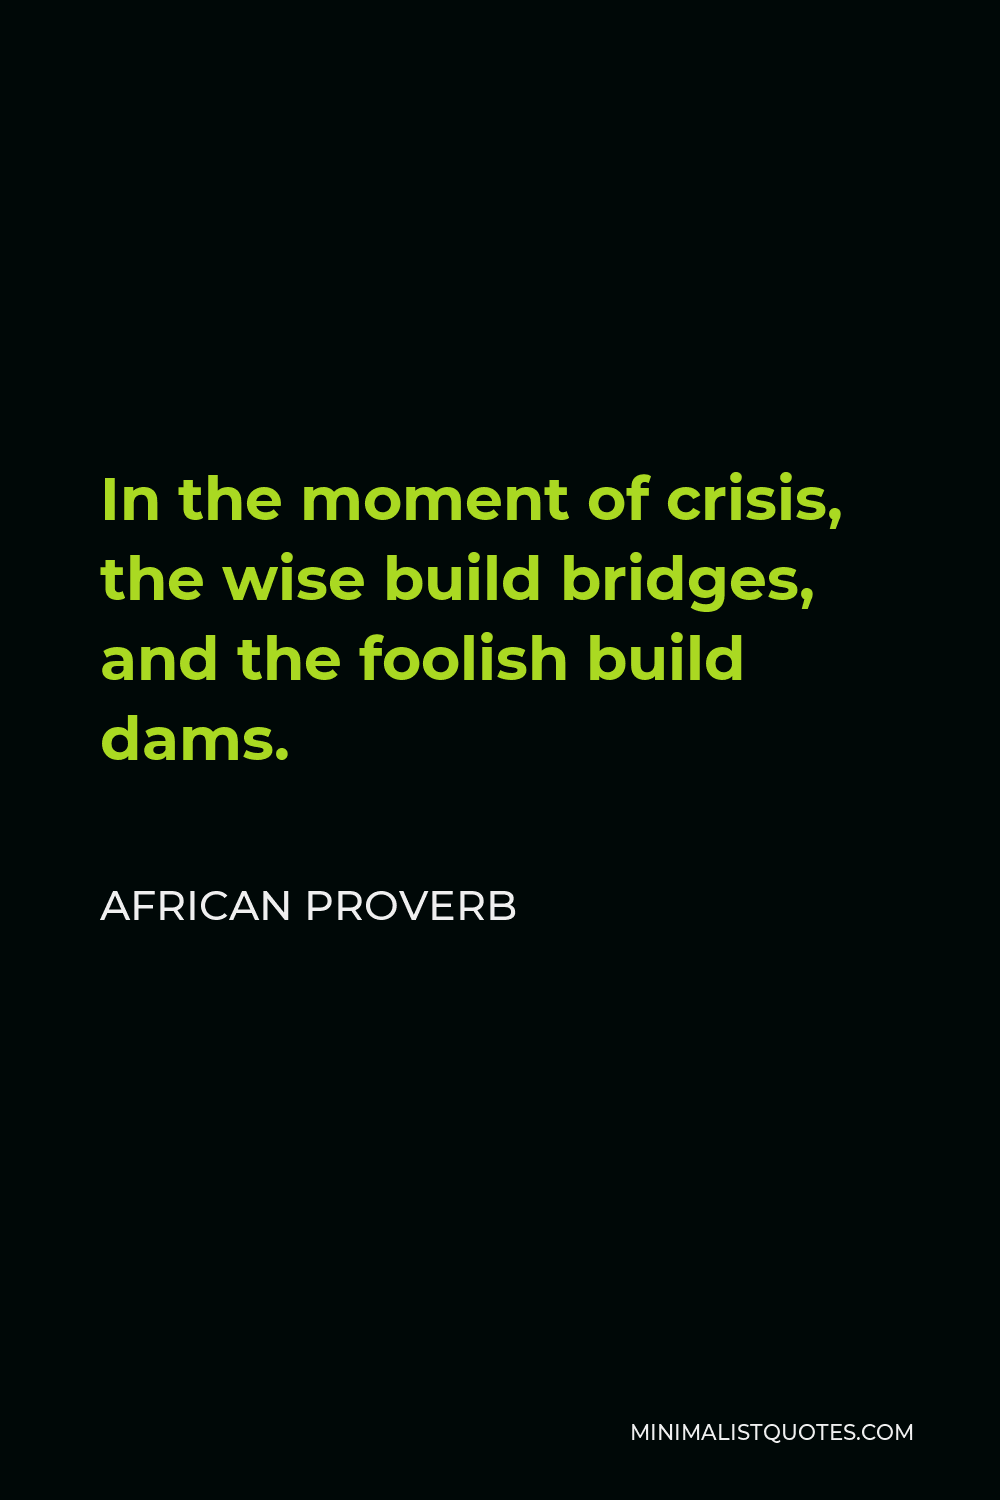 African Proverb Quote - In the moment of crisis, the wise build bridges, and the foolish build dams.